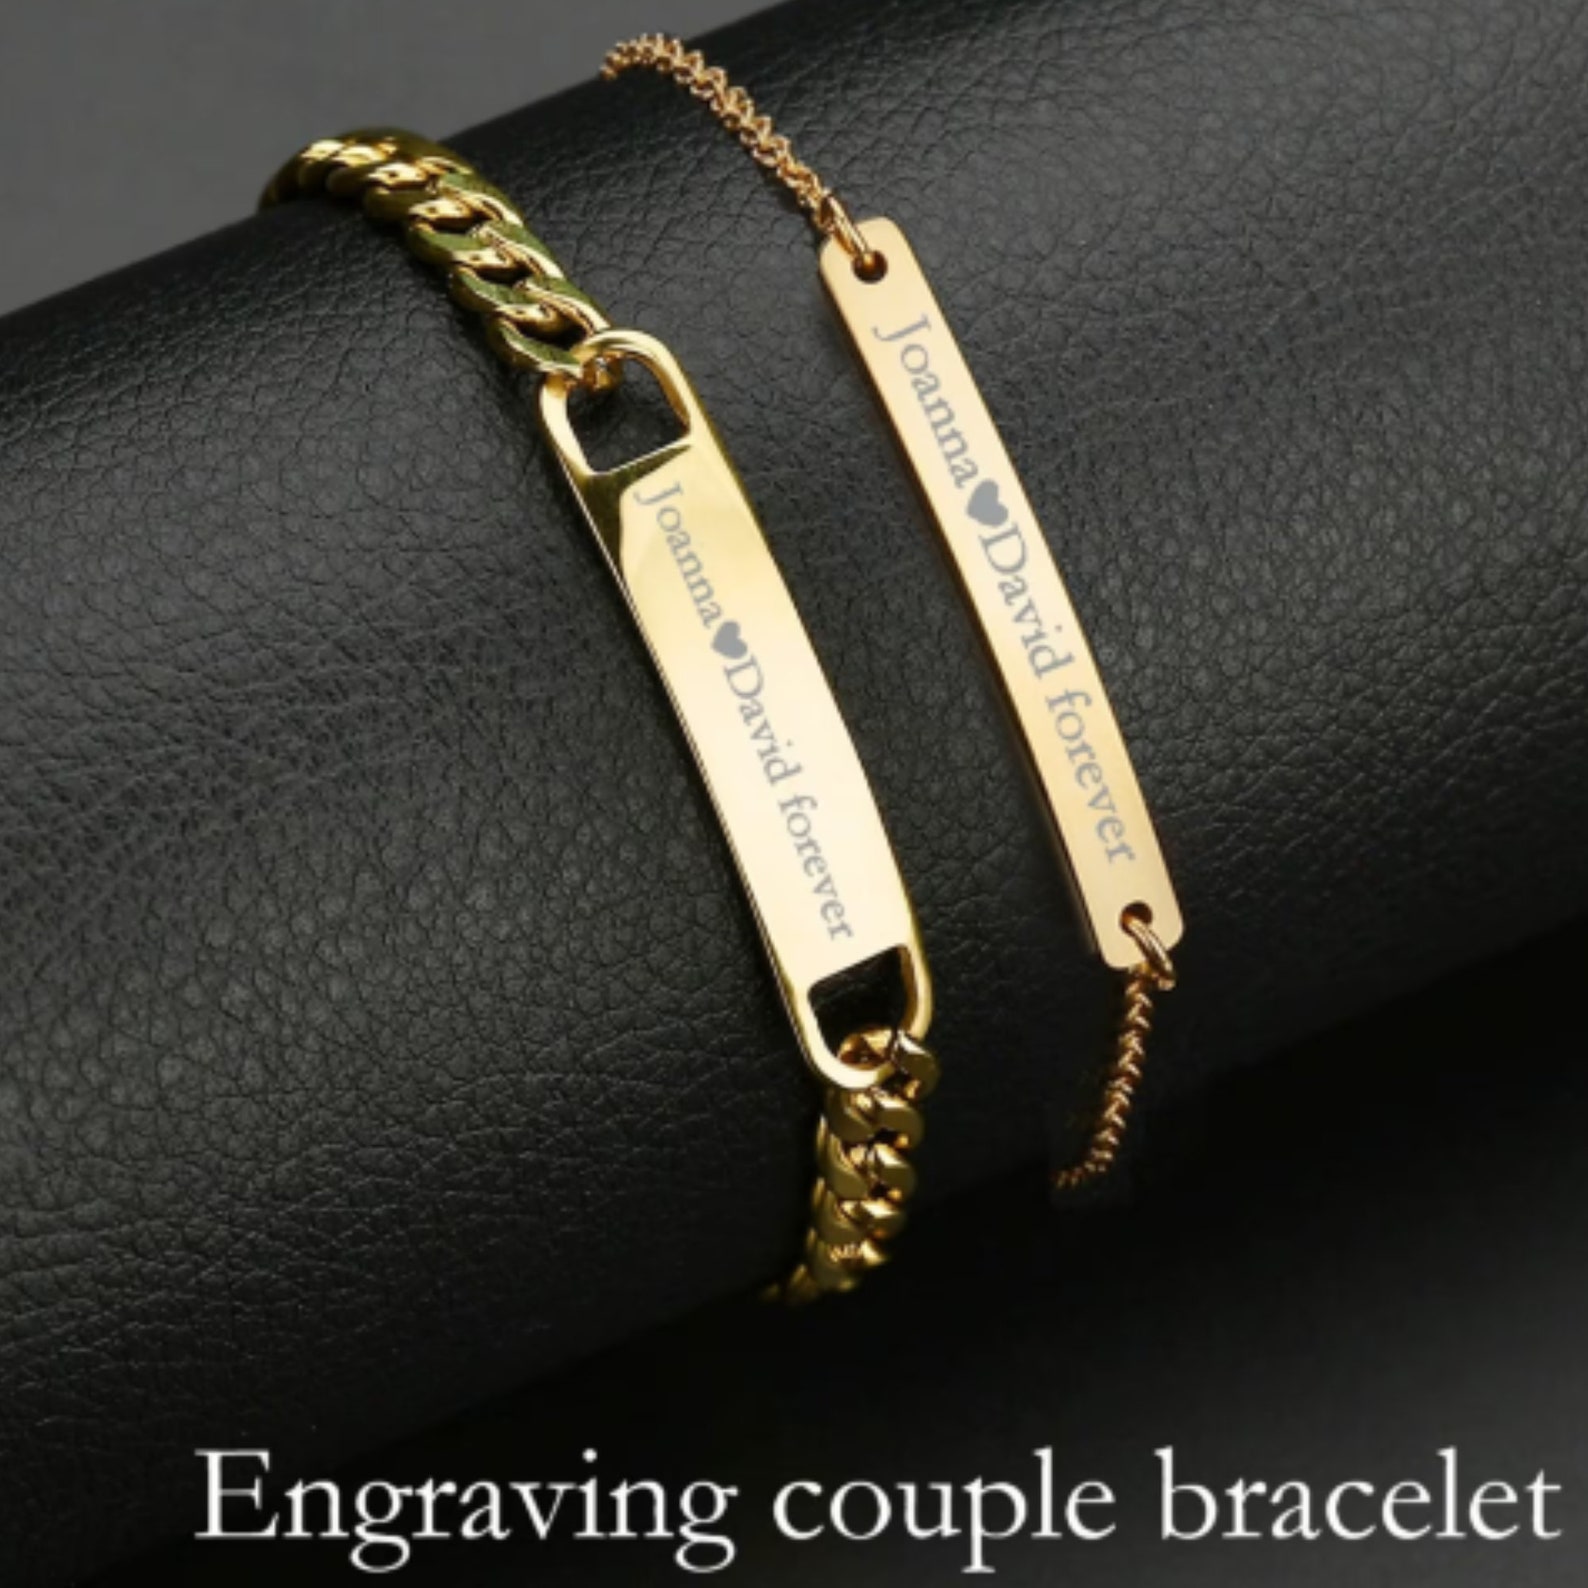 Personalized Couples Bracelet Set from Etsy